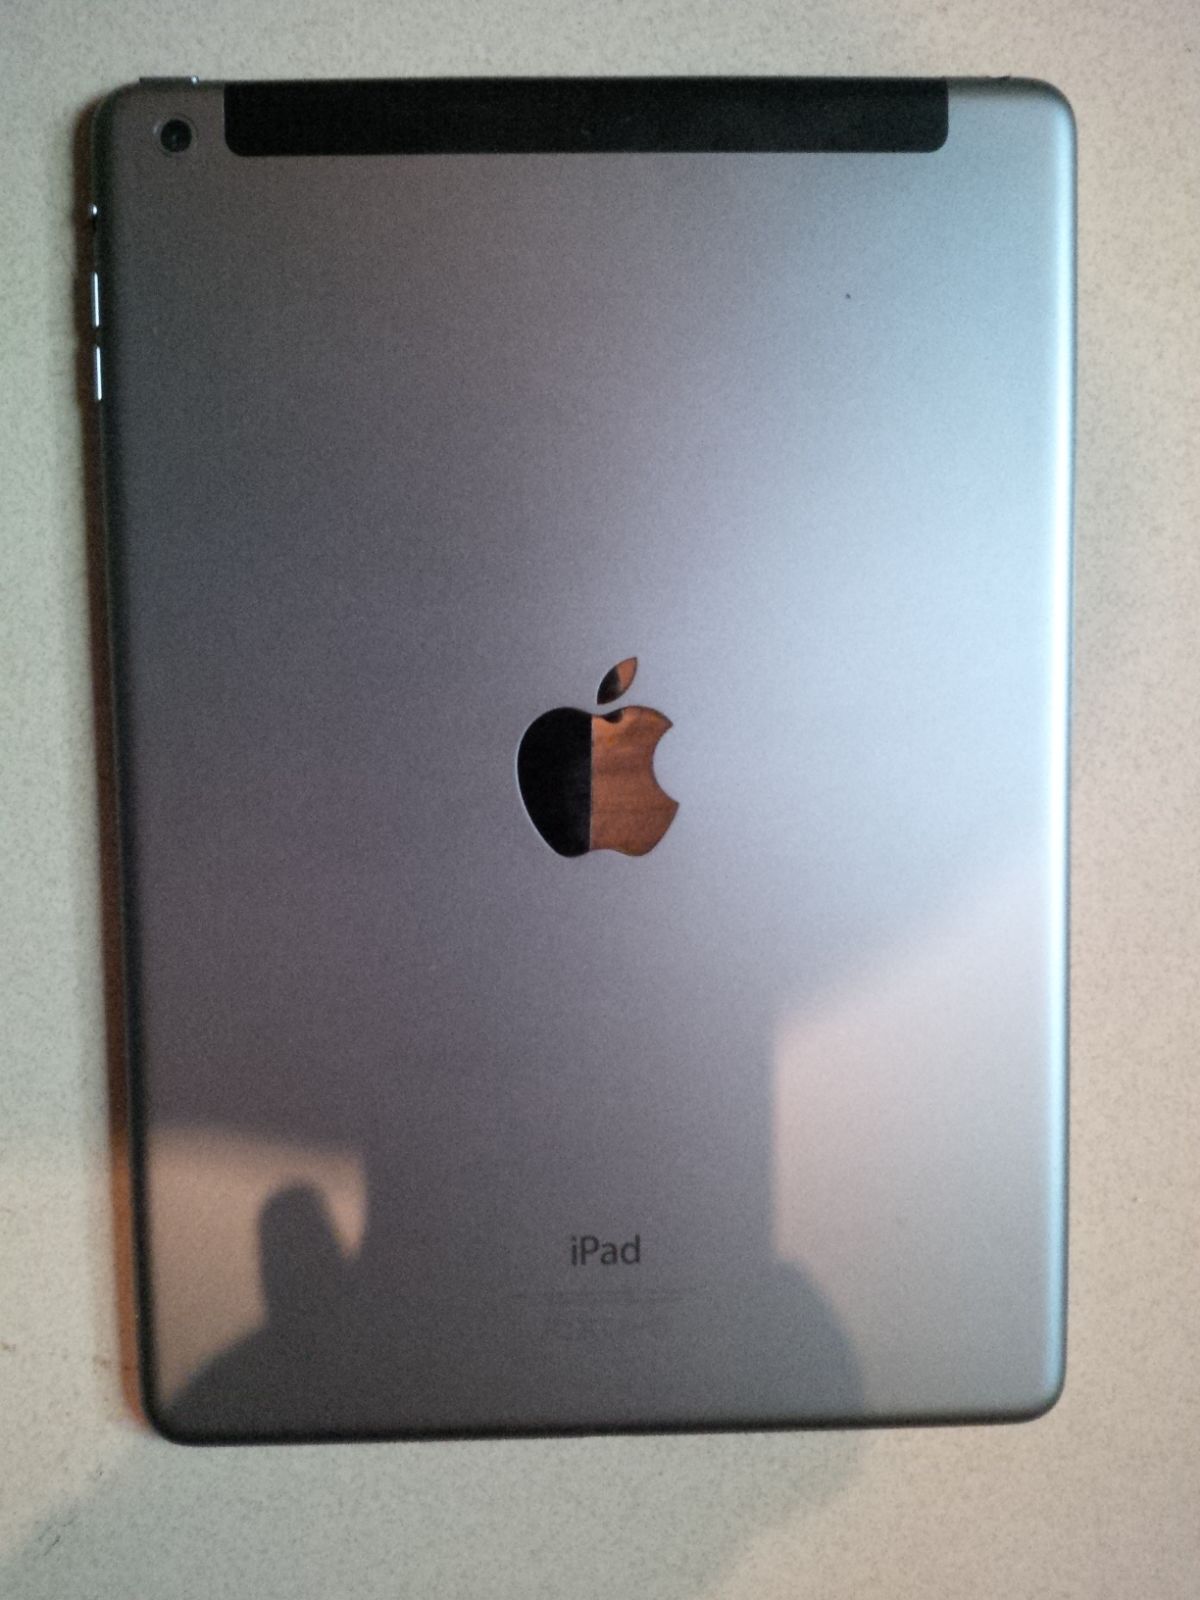 Ipad Air 16gb Wifi Only sold - Technology Market - Nigeria